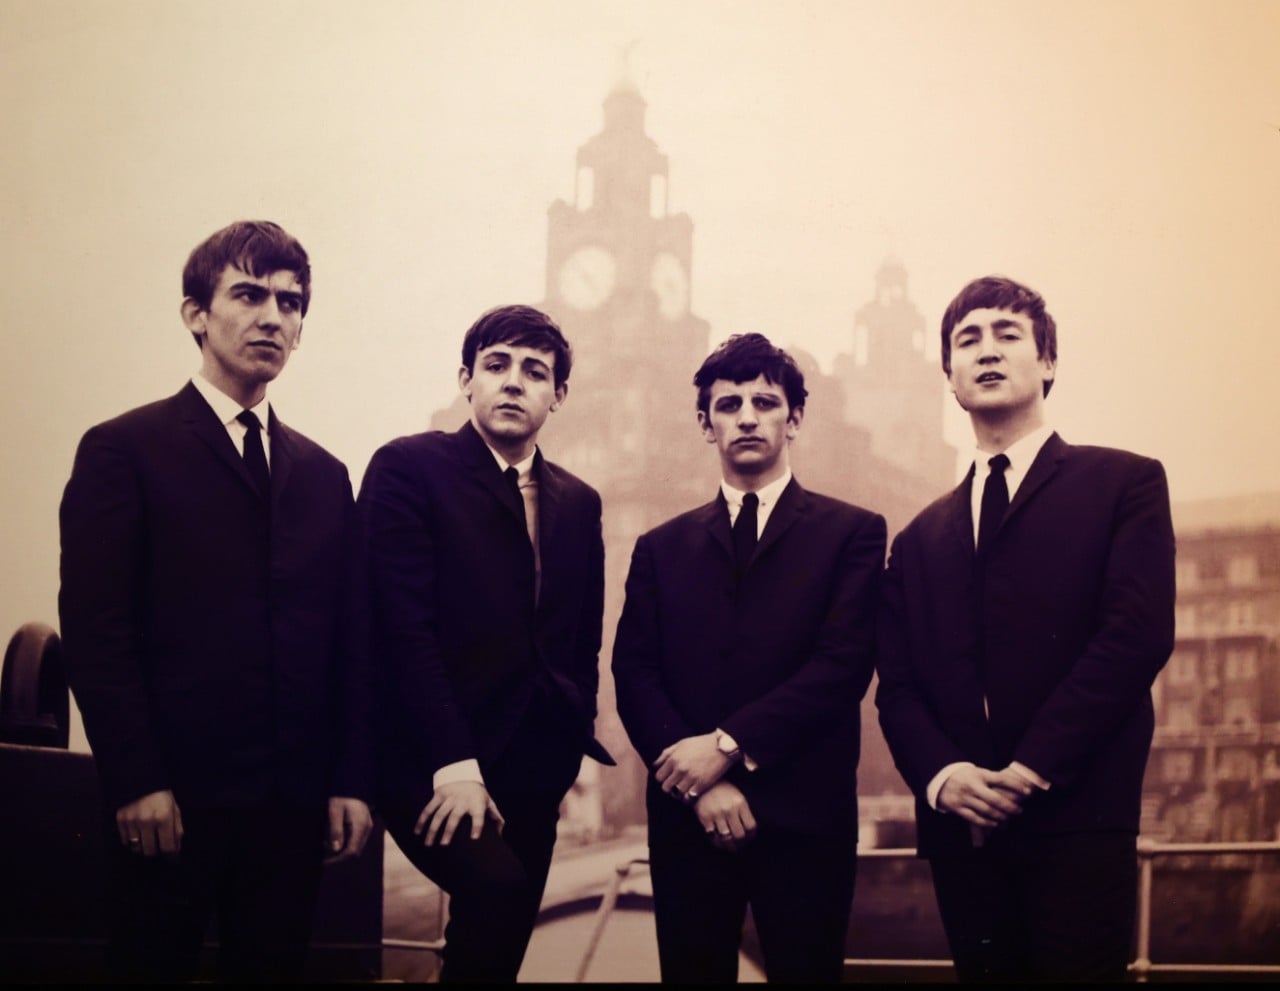 photo of four young men from the band The Beatles standing on the street in Liverpool